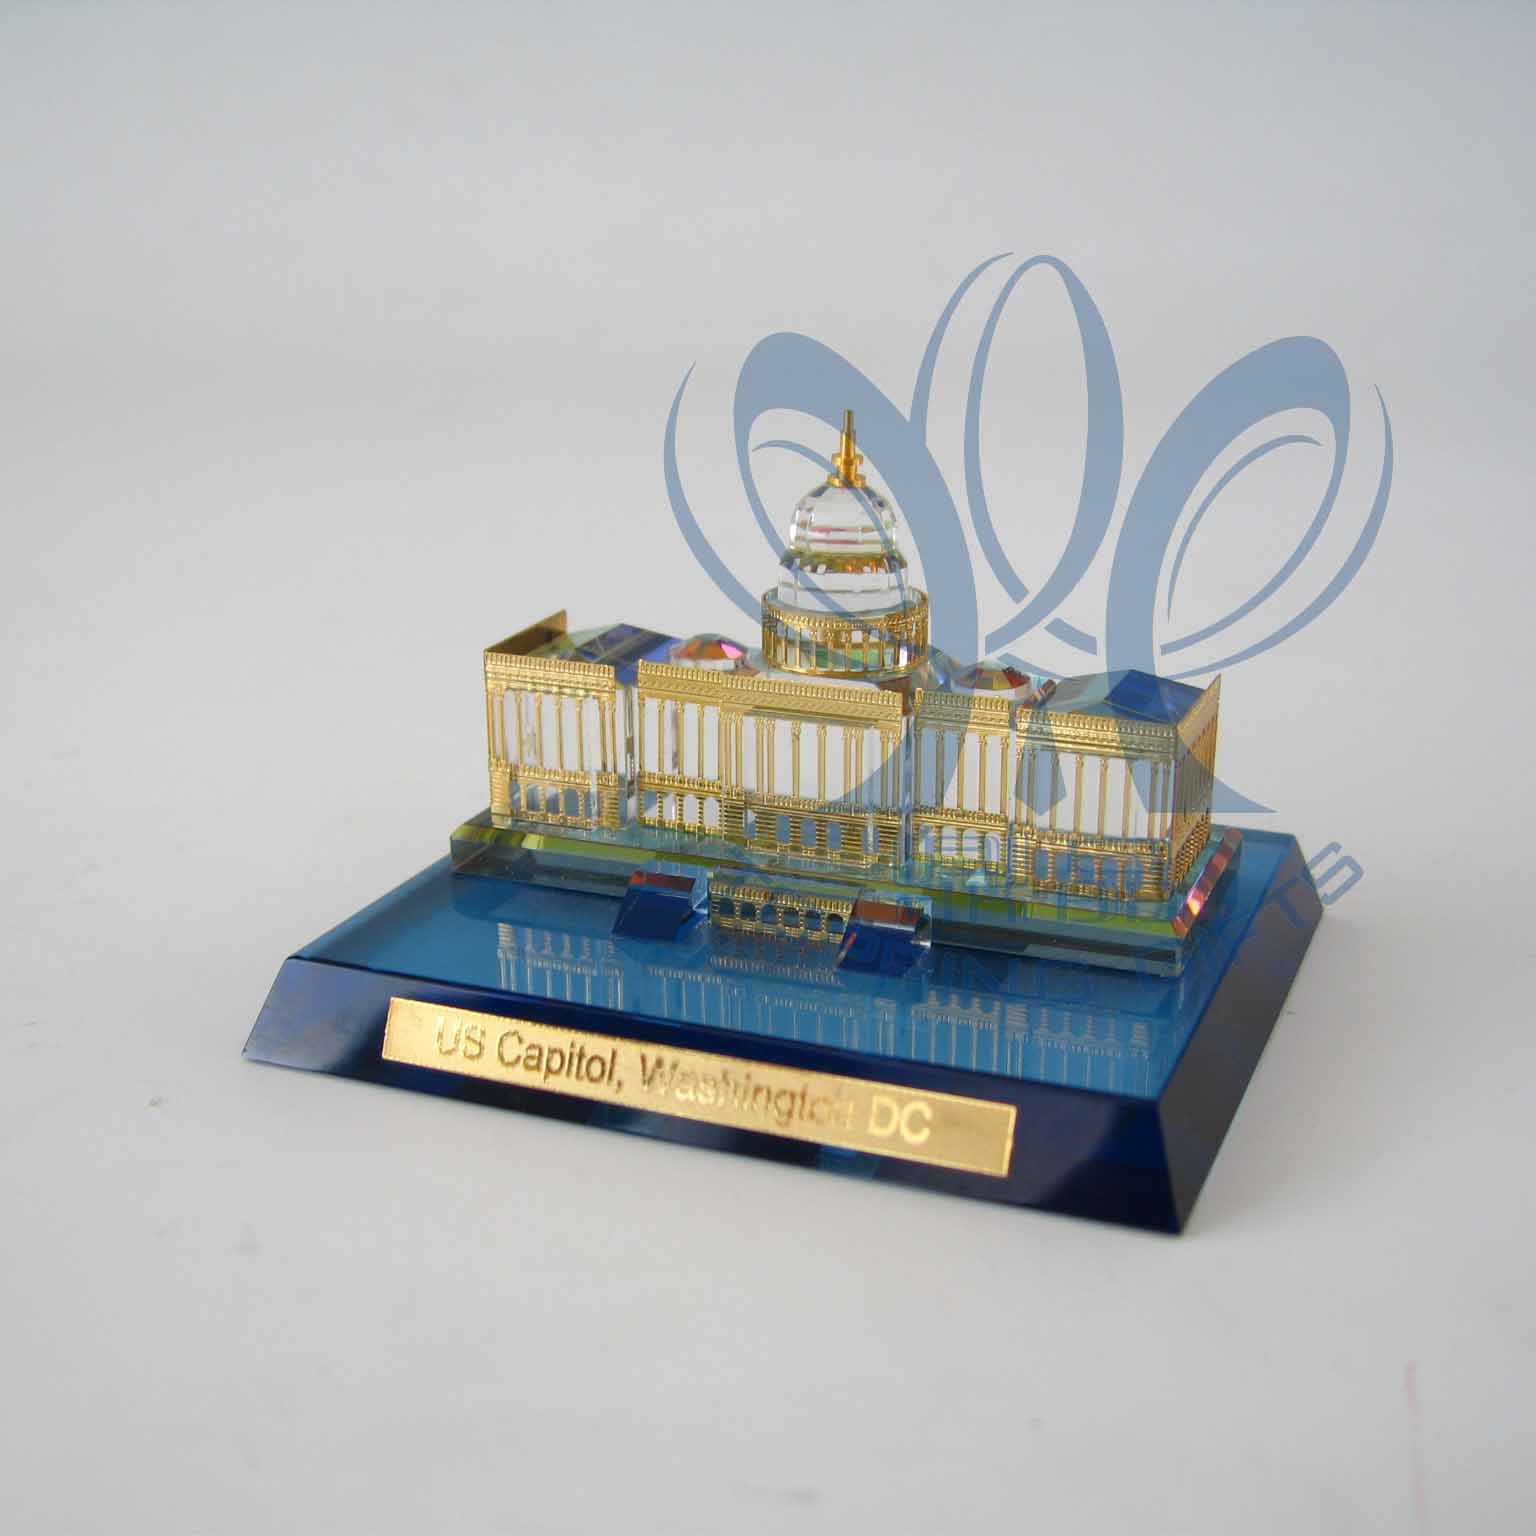 US Capitol (Crystal and Gold model Souvenir) small